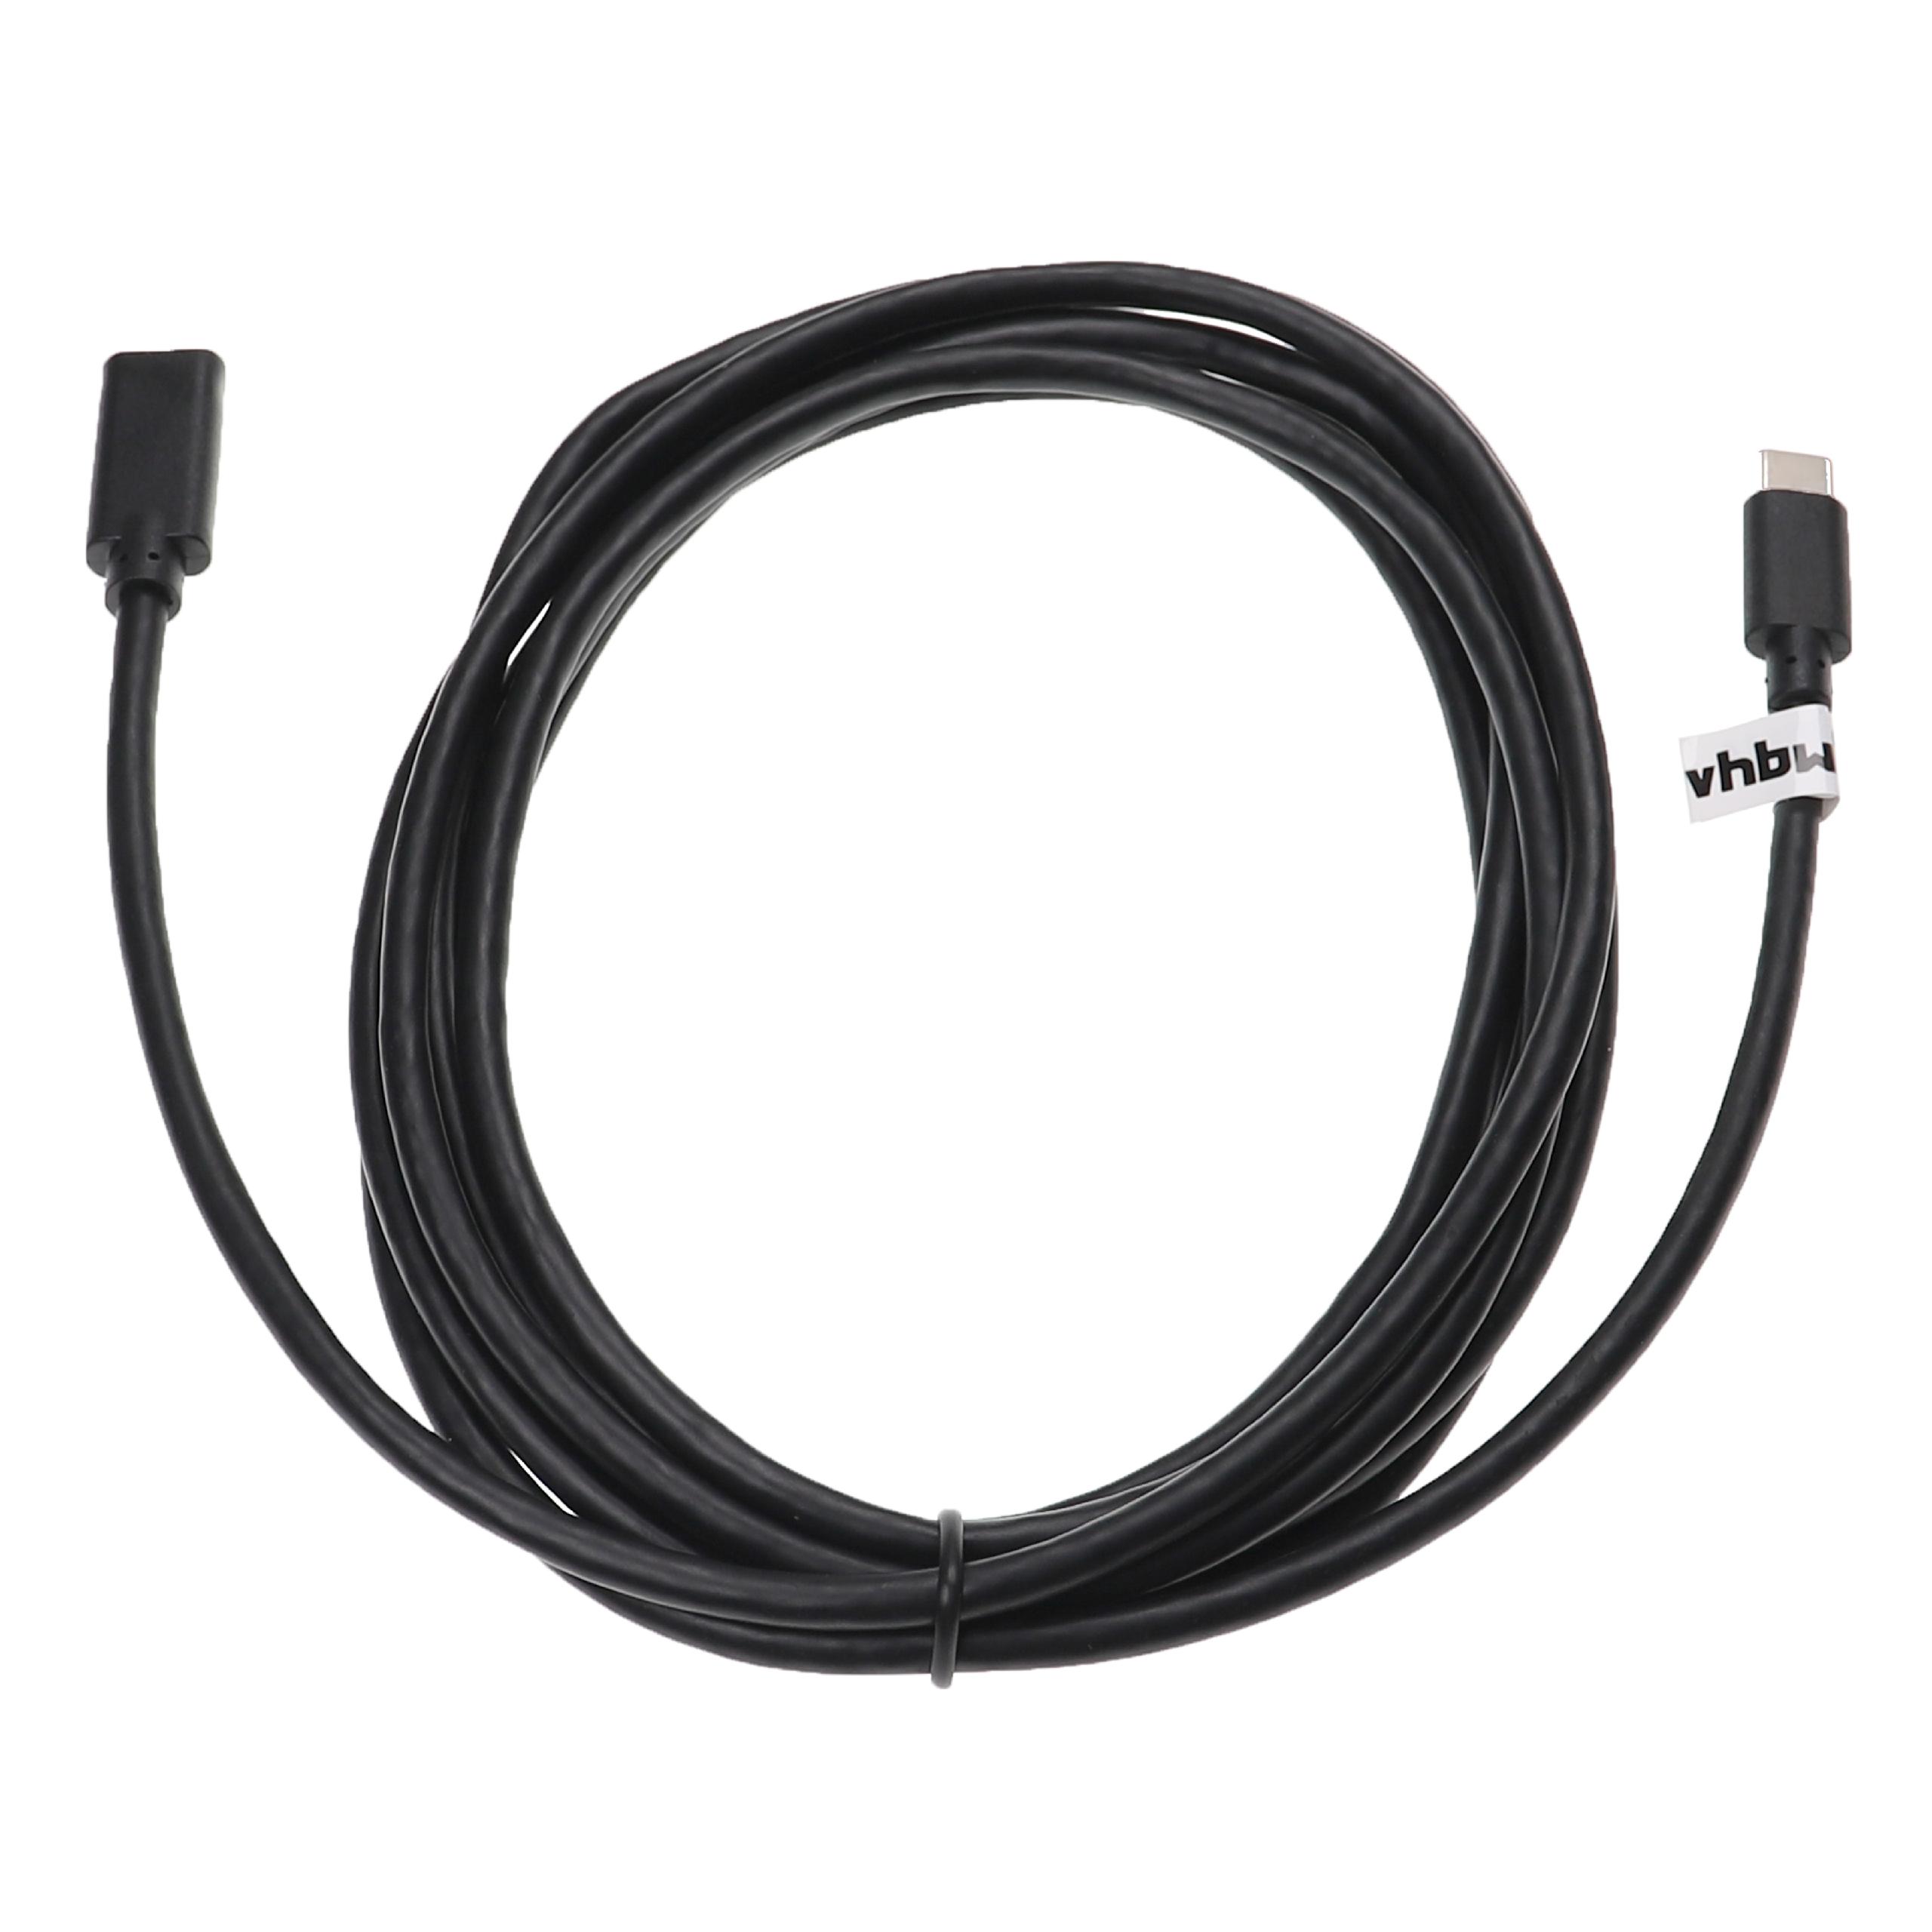 USB C Extension Cable for various Tablets, Notebooks, Smartphones, PCs - 3 m Black, USB 3.1 C Cable